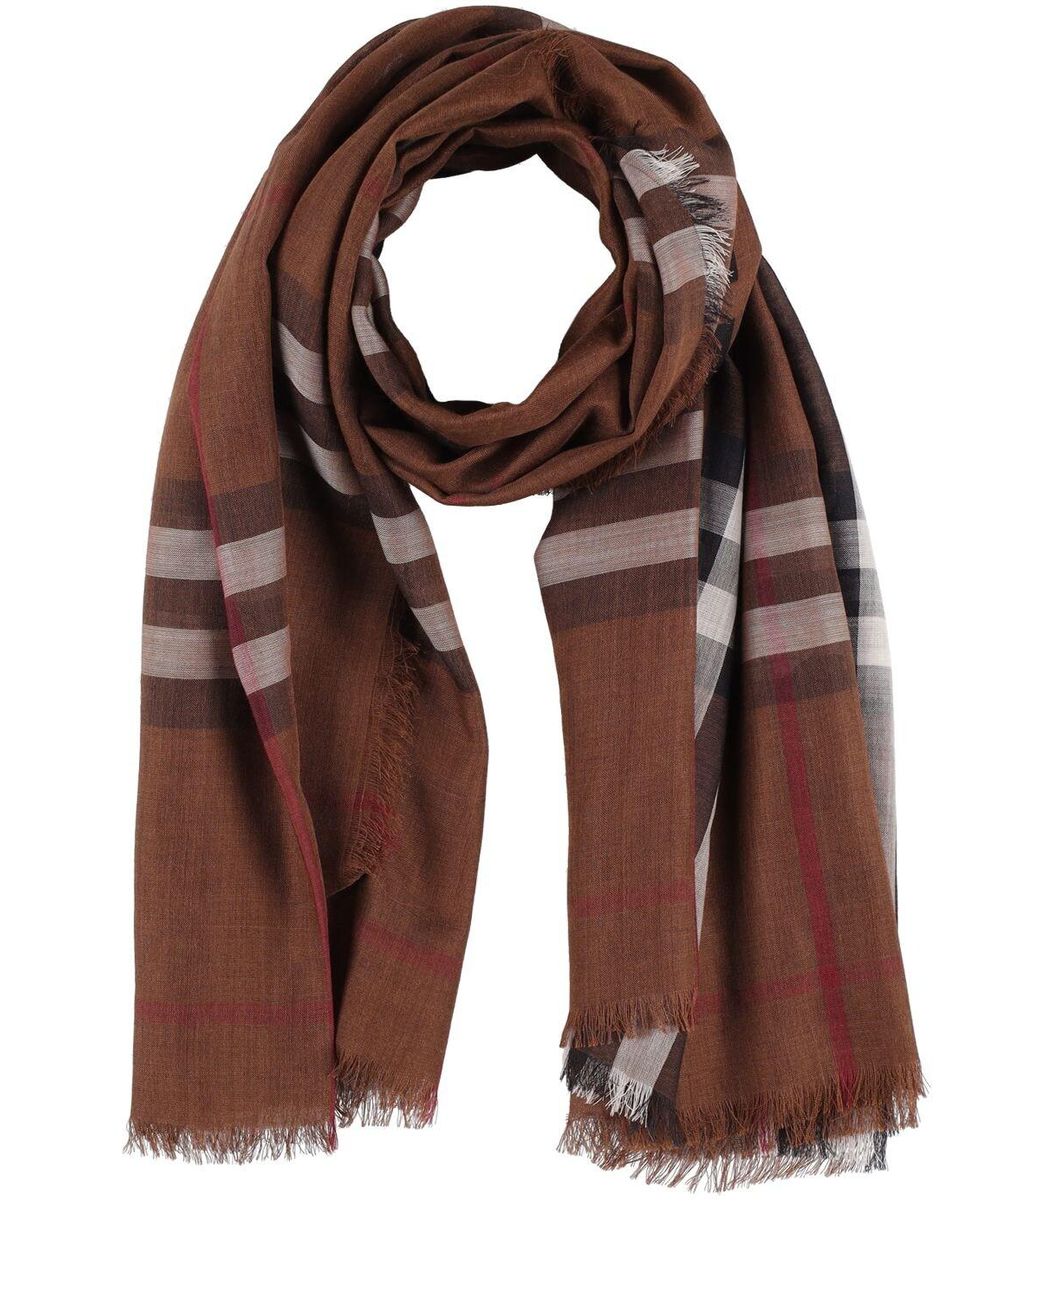 Burberry Giant Check Wool & Silk Scarf in Brown | Lyst Canada